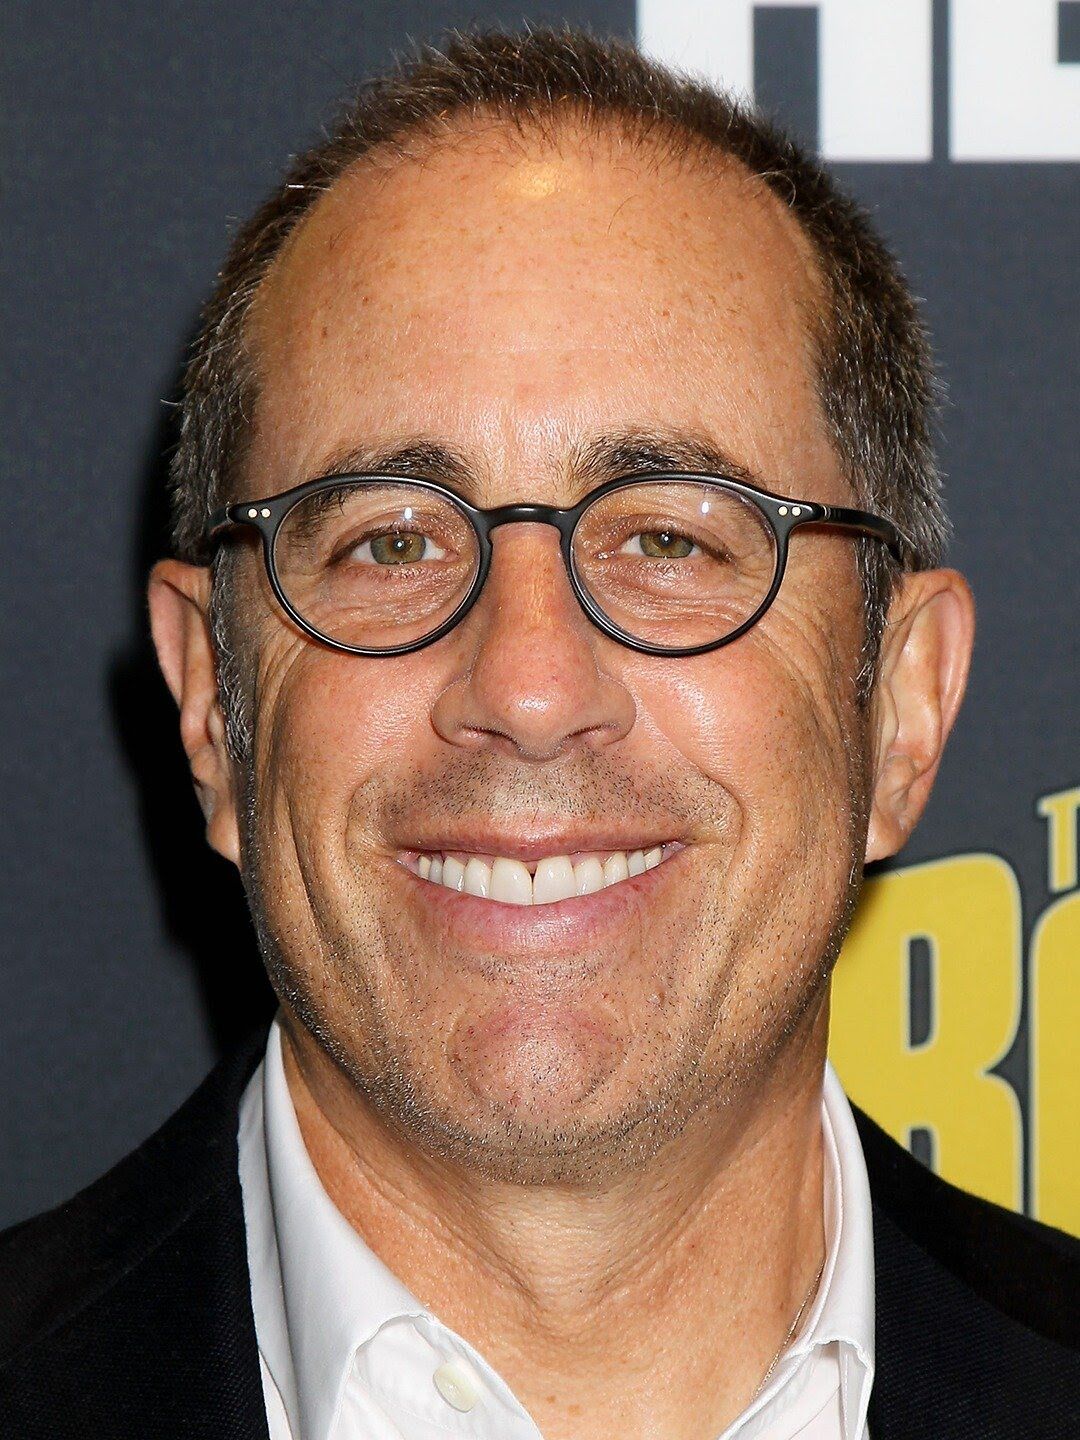 Jerry Seinfeld dishes on the mot classic 'Seinfeld' episodes